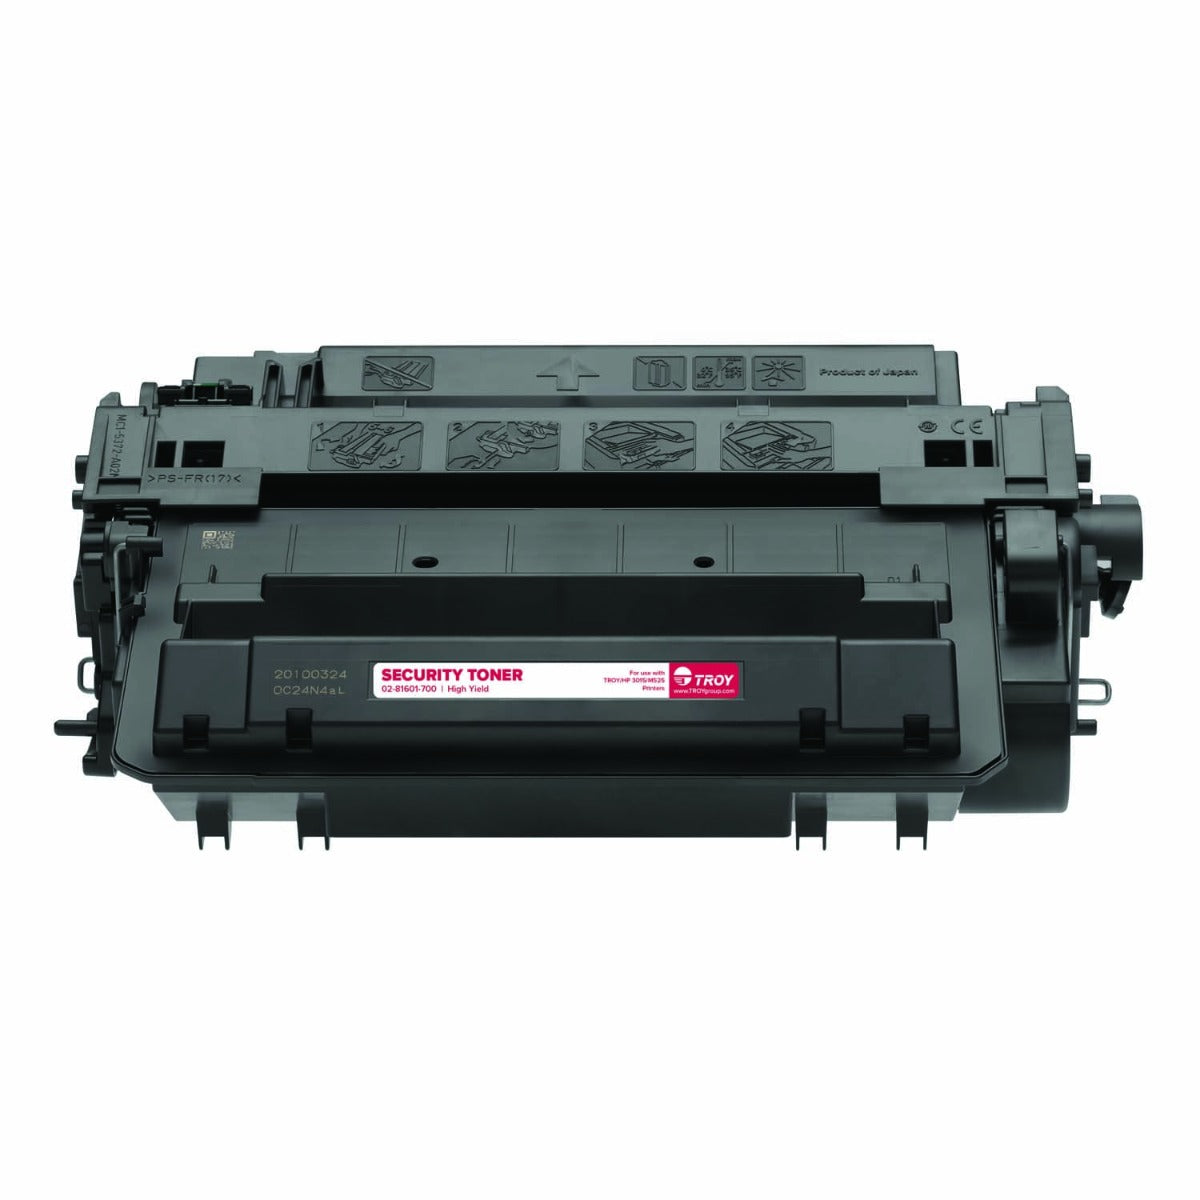 TROY 3015/M525 MFP Security Toner High Yield